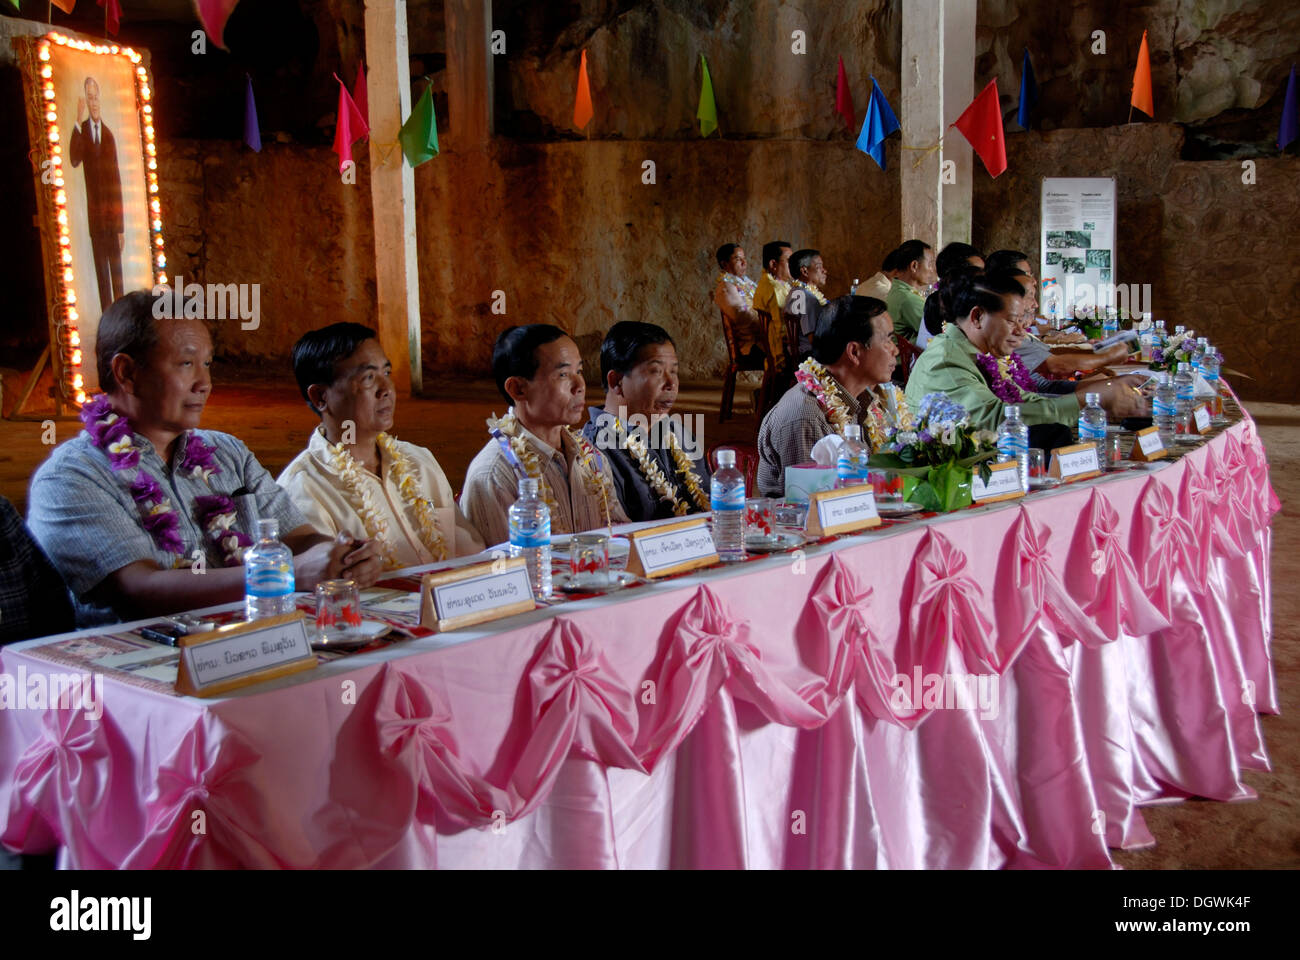 Event of the Communist Party in the Tham Sang Lot Cave, Elephant Cave, long table with many delegates, Vieng Xai Stock Photo